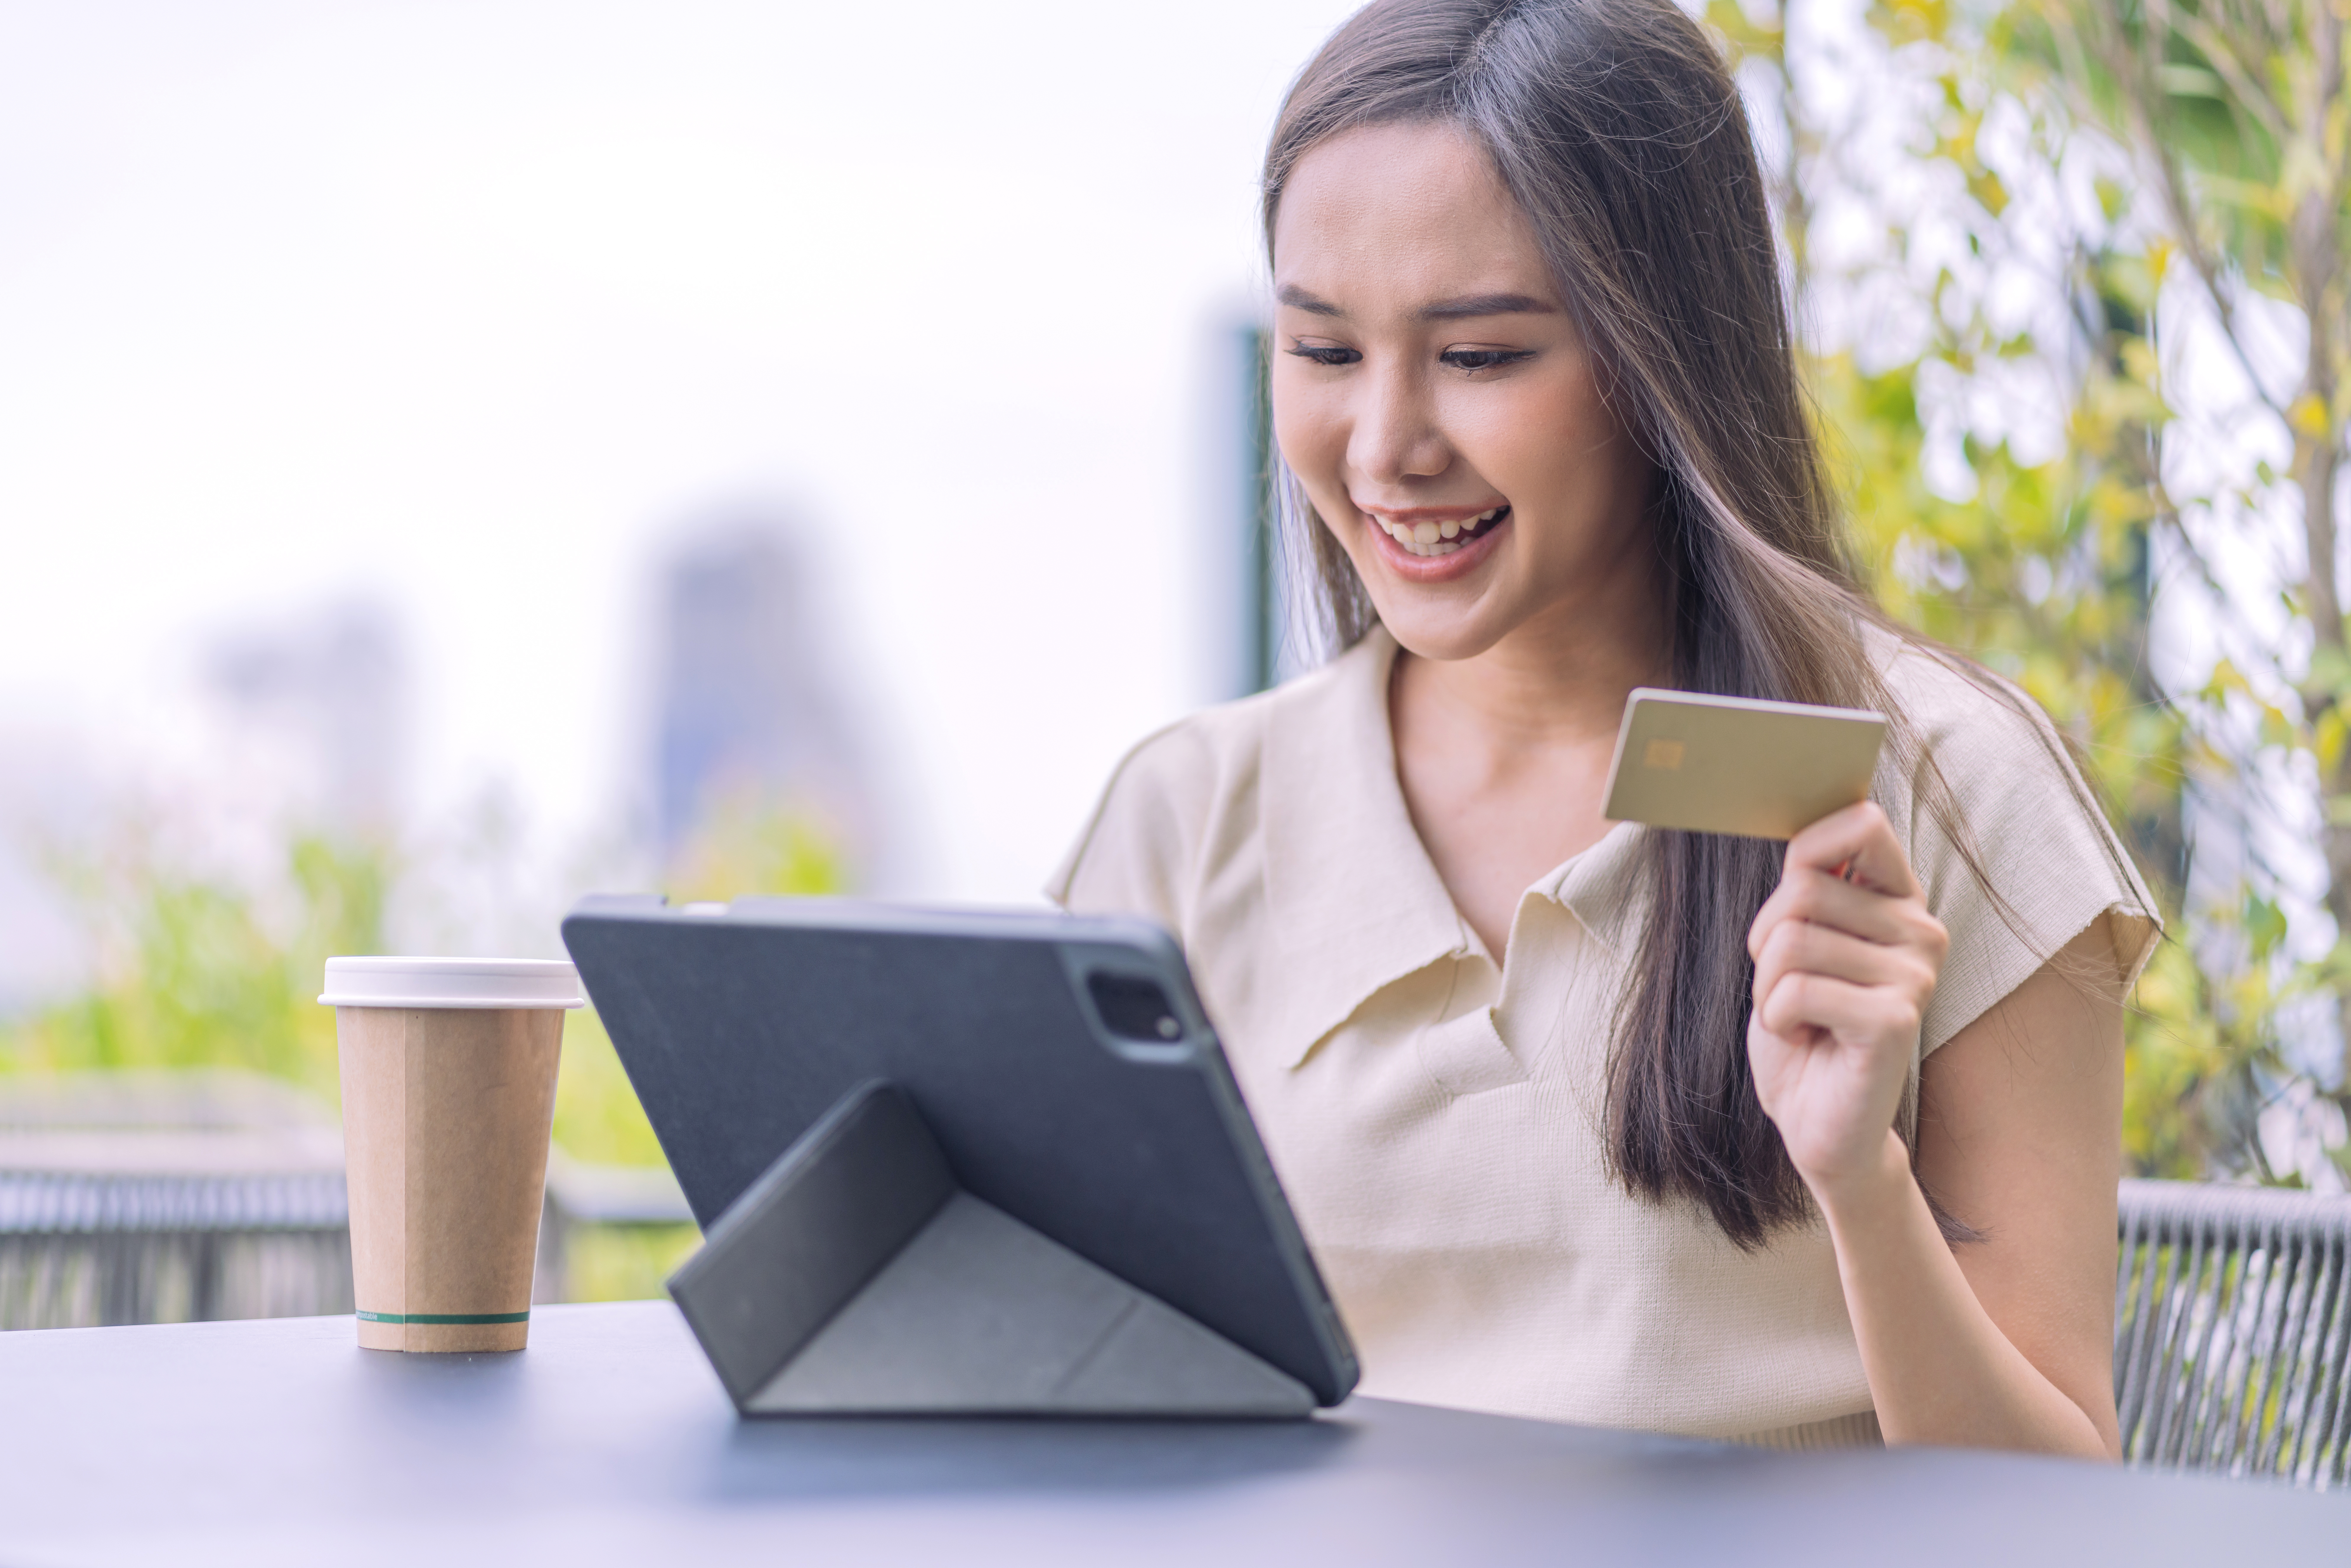 https://img.moneyduck.com/article_attachment/1664257528-asian-woman-is-buying-online-paying-with-credit-cardfemale-sitting-cafe-outdoor-enjoying-weekend-vacation-shopping-online-smartphone-making-mobile-payment-with-credit-card.jpg